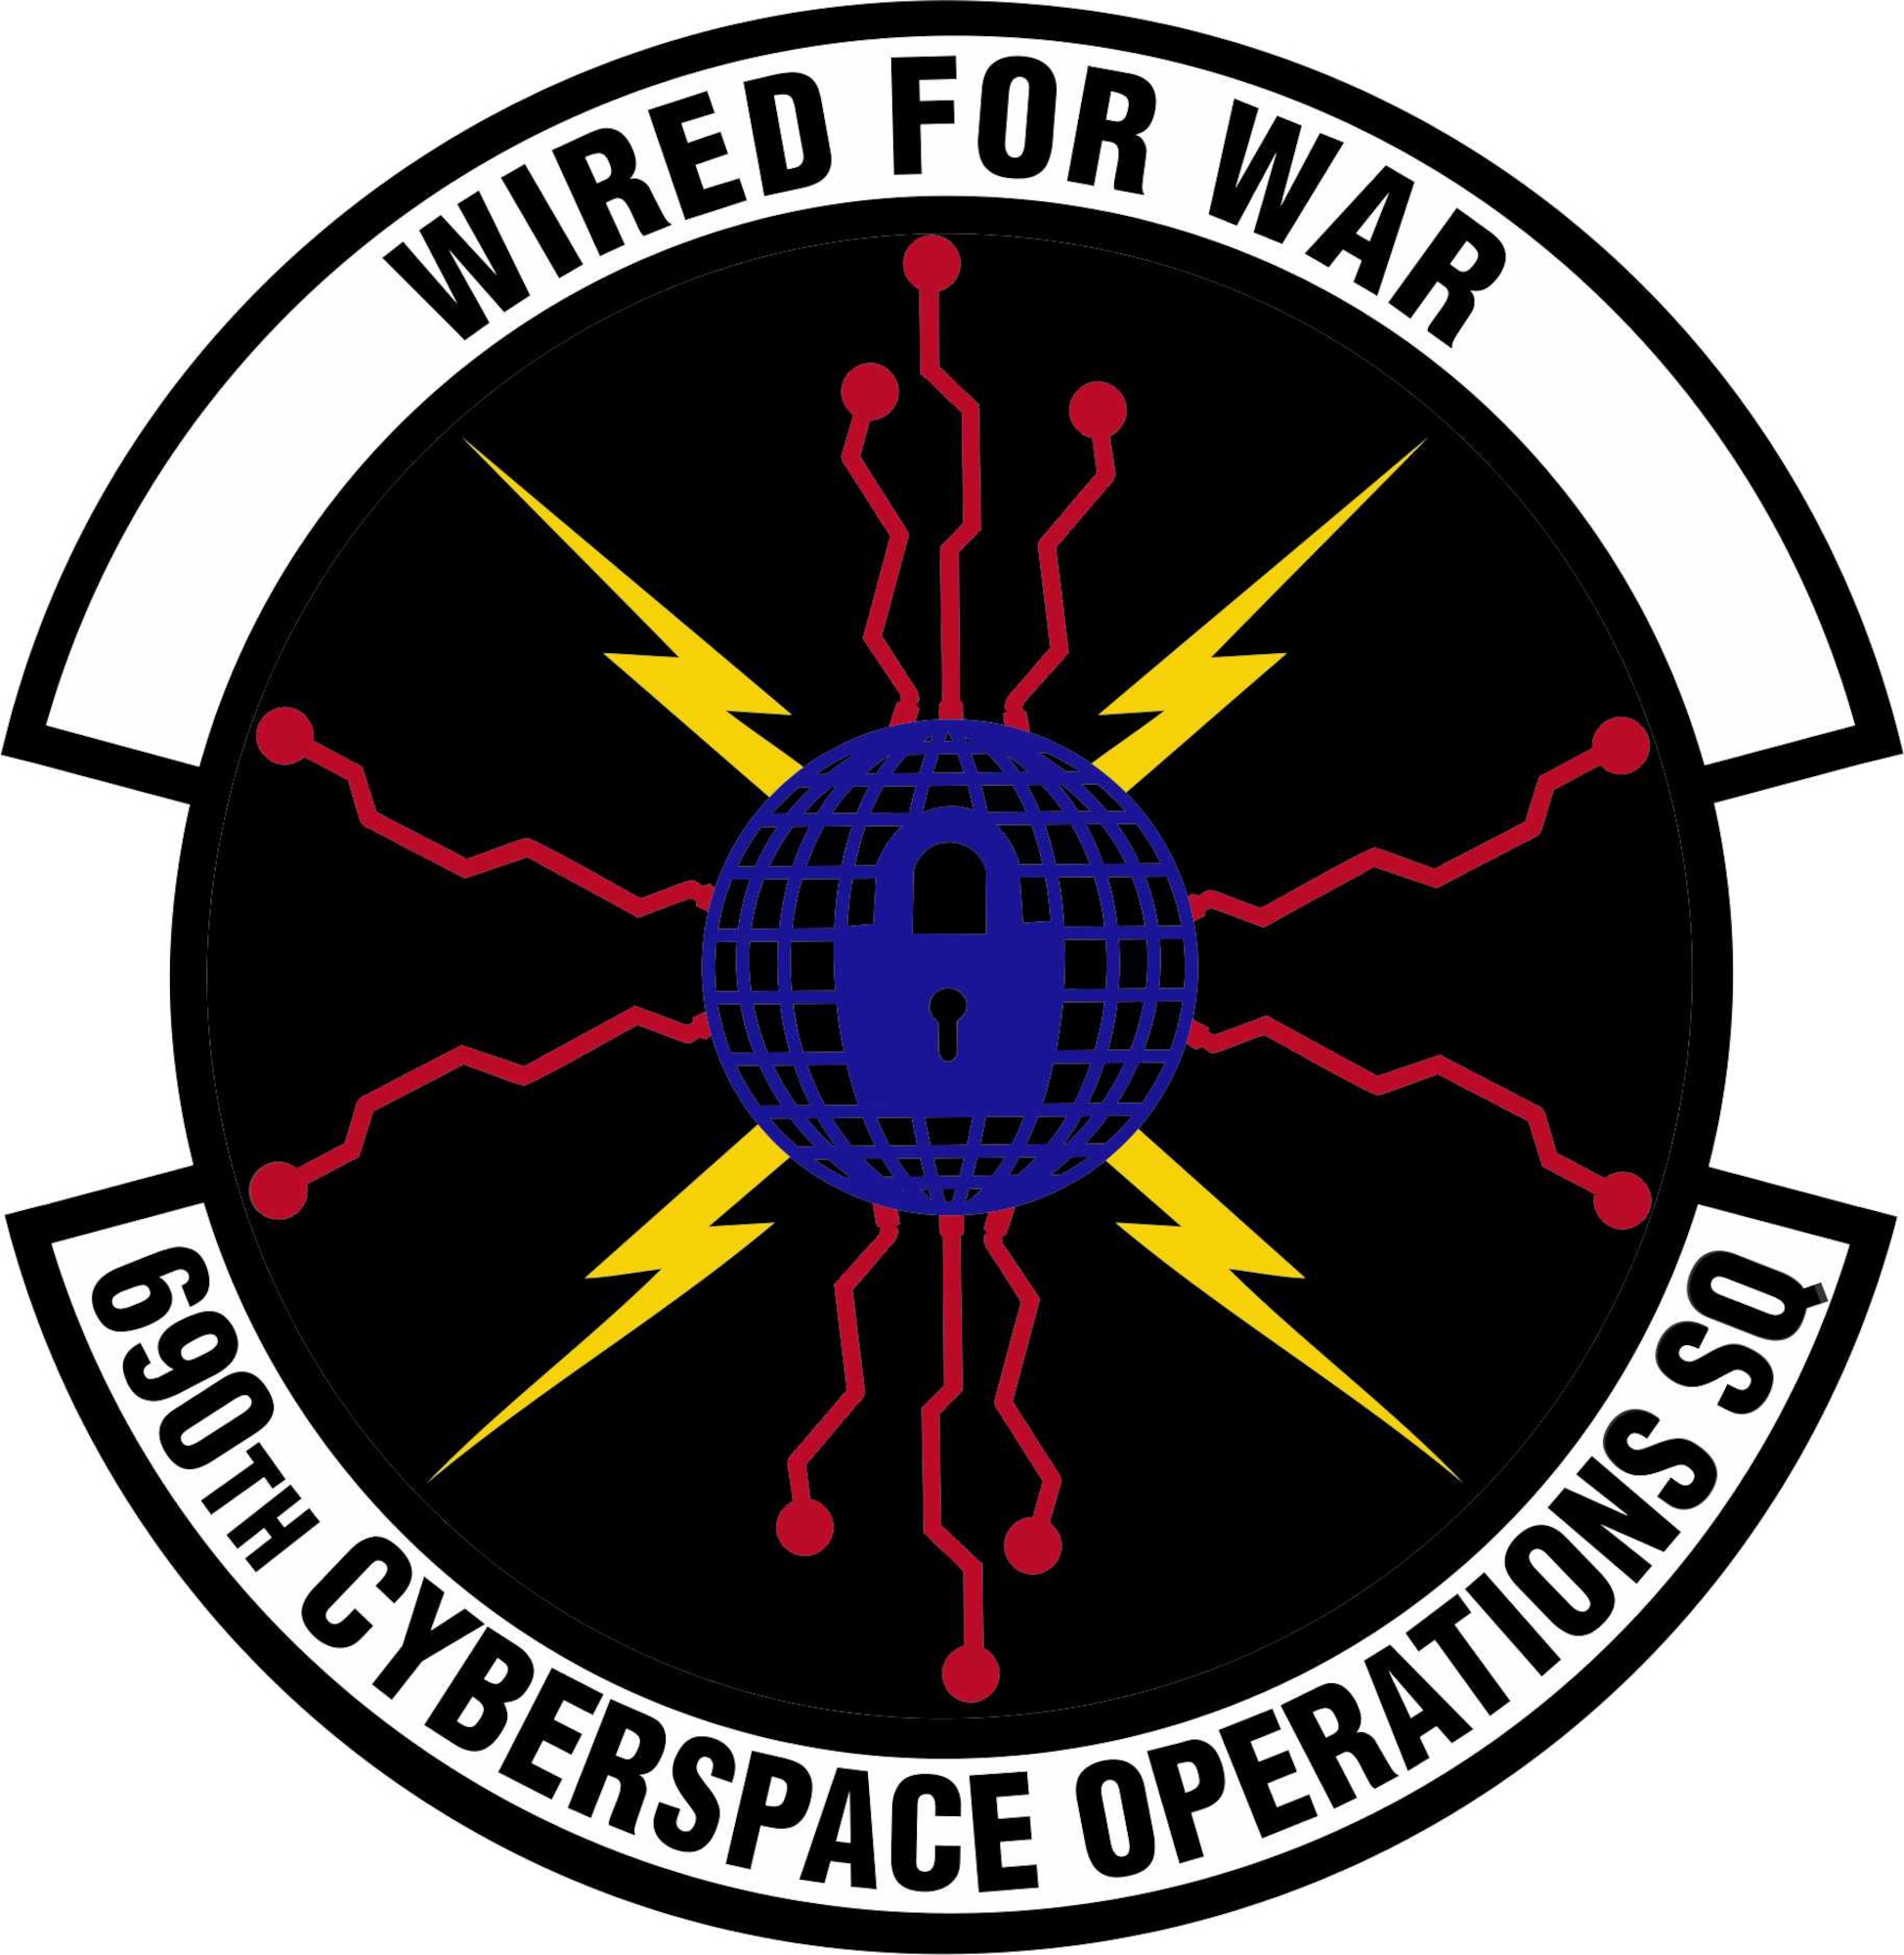 In accordance with AFI 84-105, chapter 3, commercial reproduction of this emblem is NOT authorized without approval of the organization's commander.  